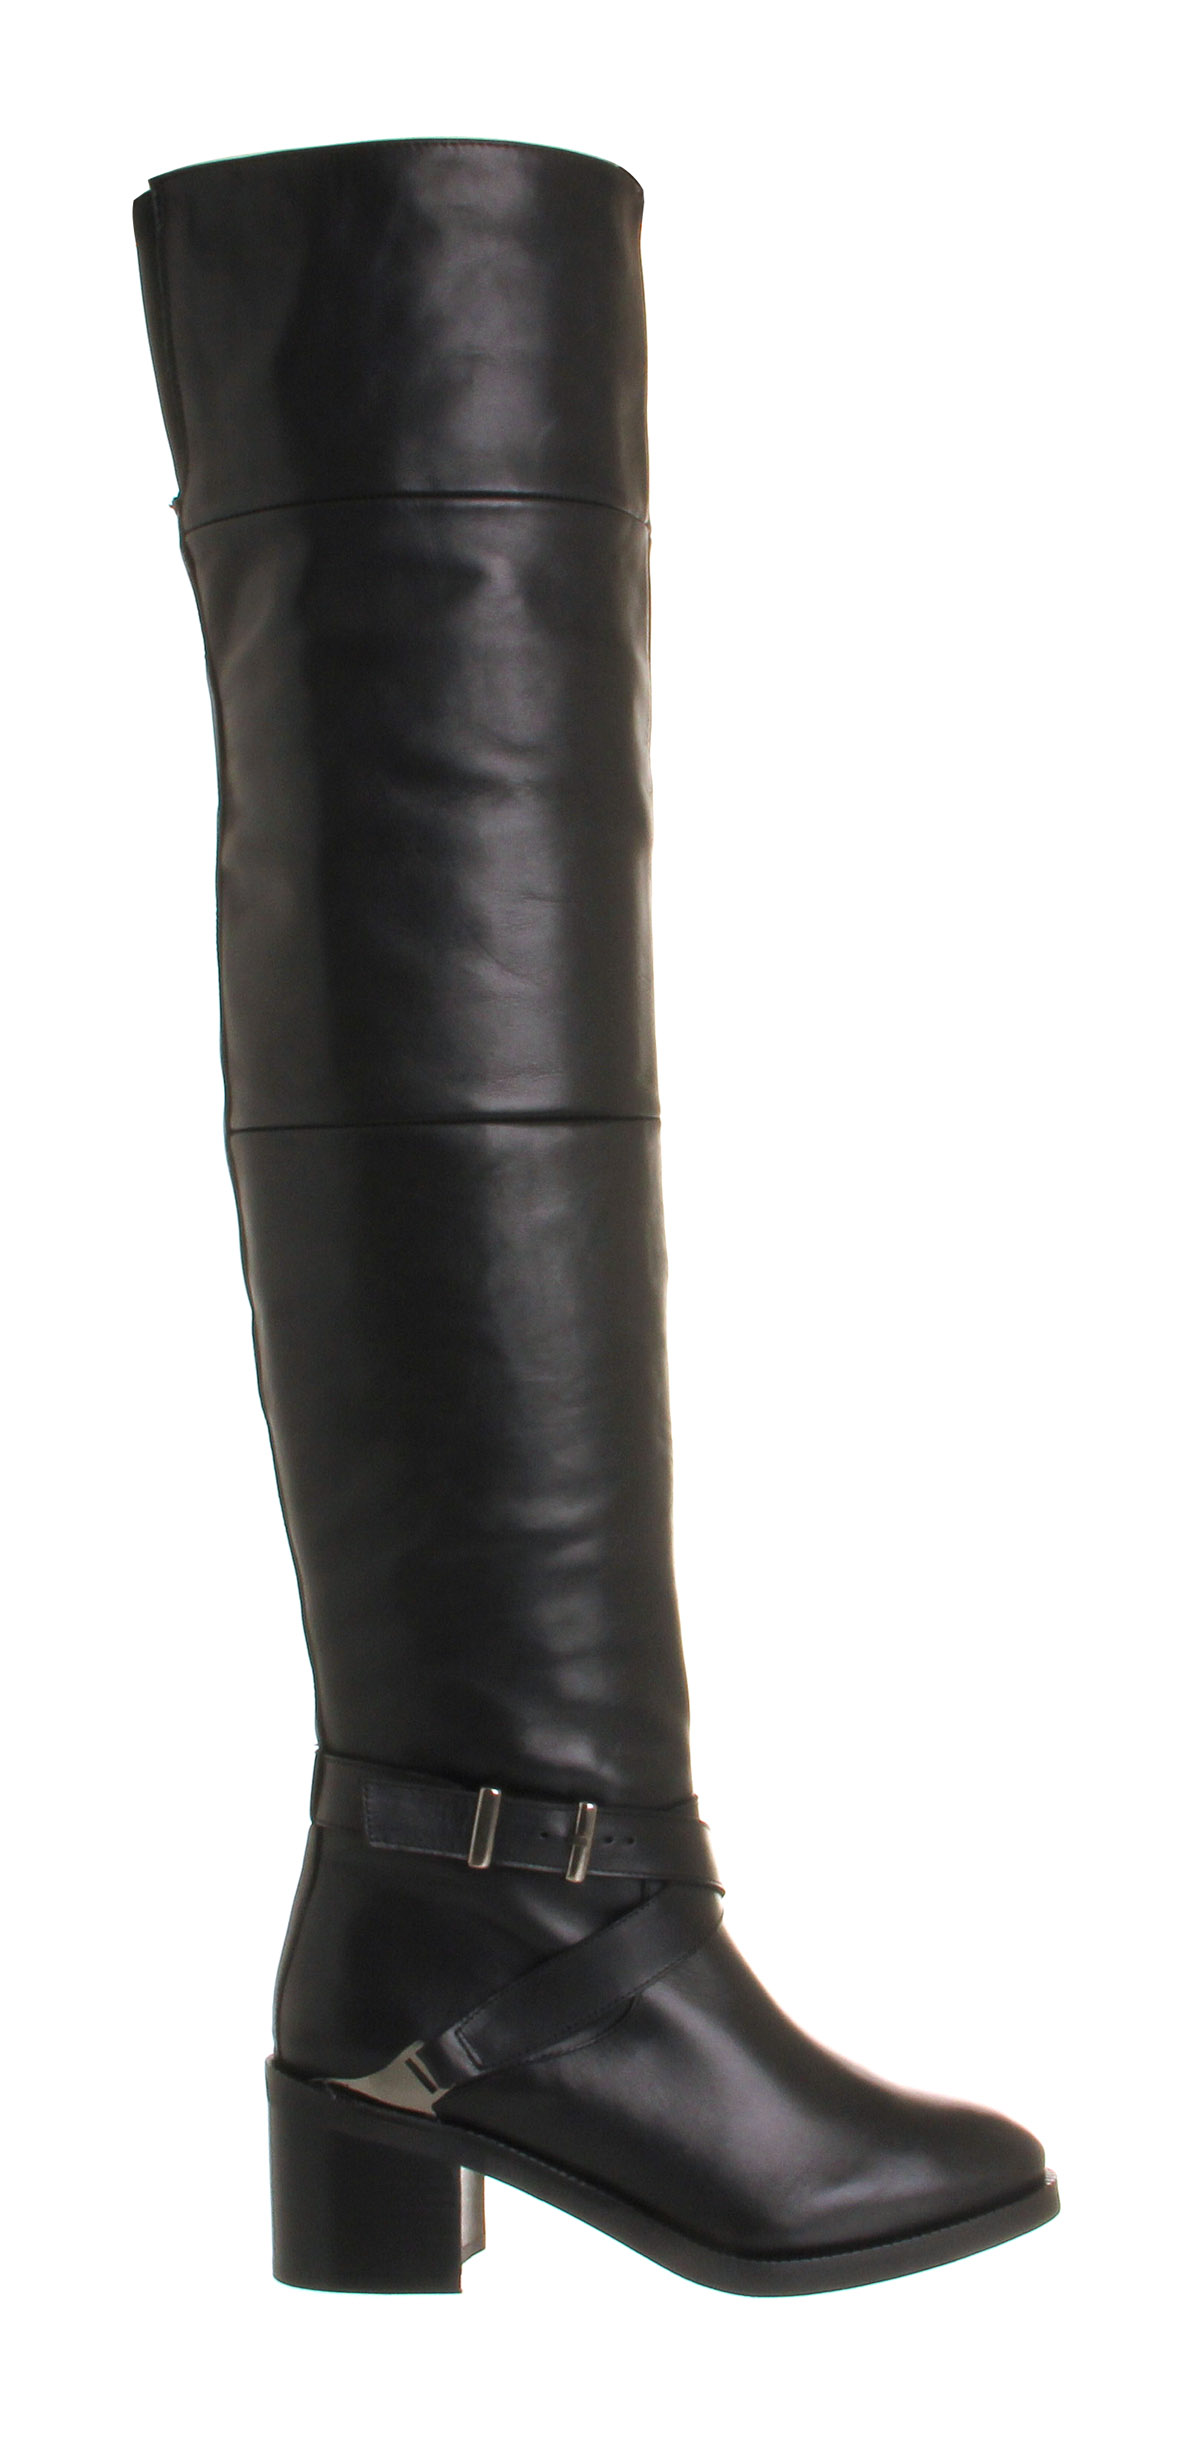 OFFICE Advocate Black Leather - Knee High Boots